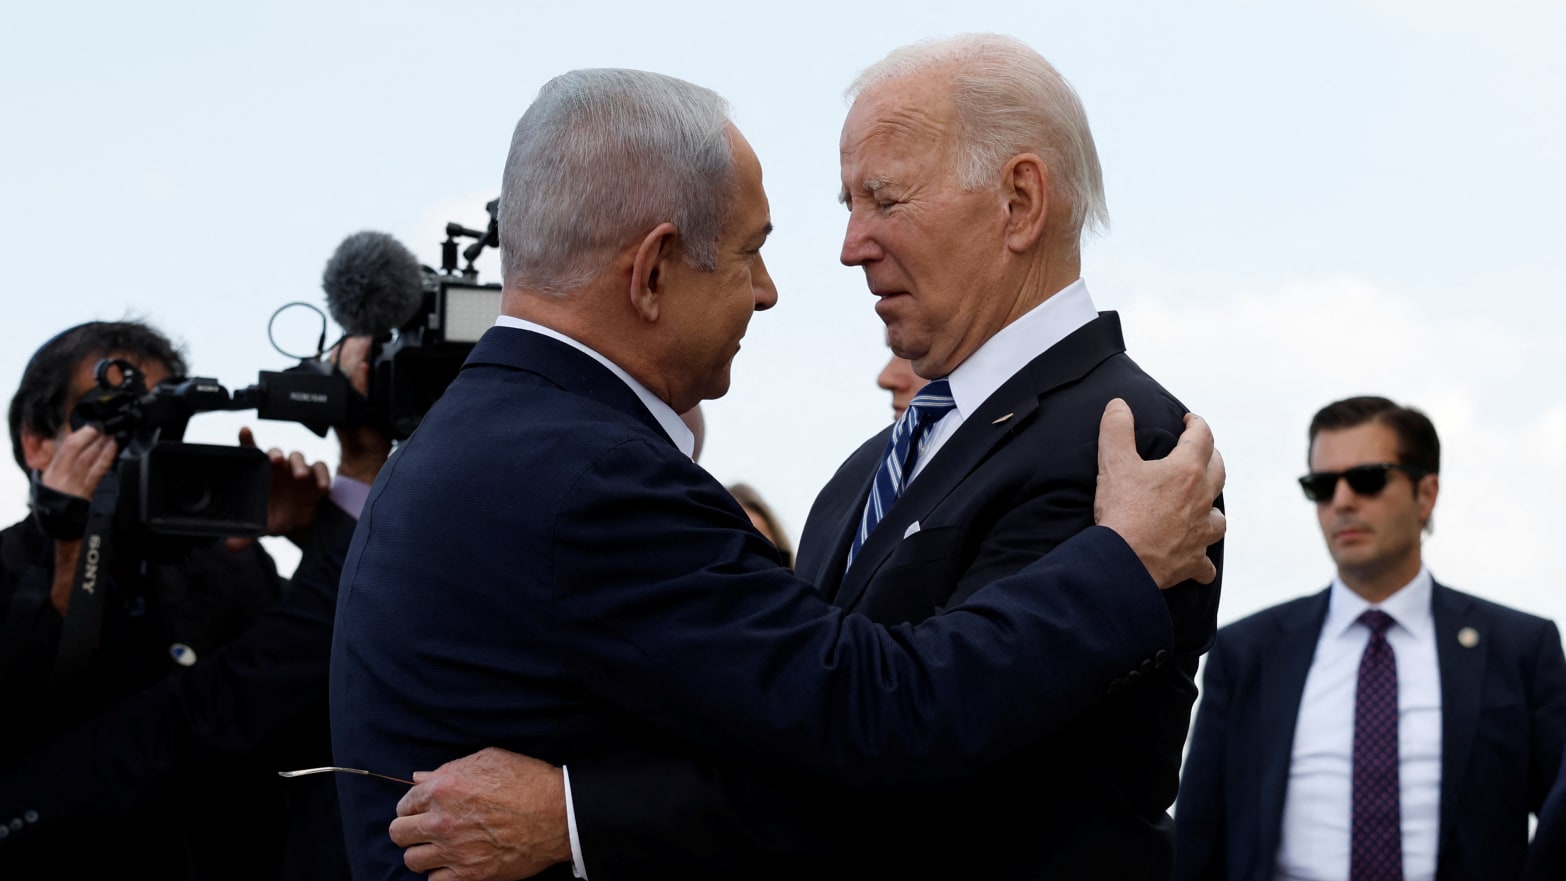 An American official criticizes the Zionist regime’s adventurous actions against Iran / Biden remains blindly loyal to Tel Aviv